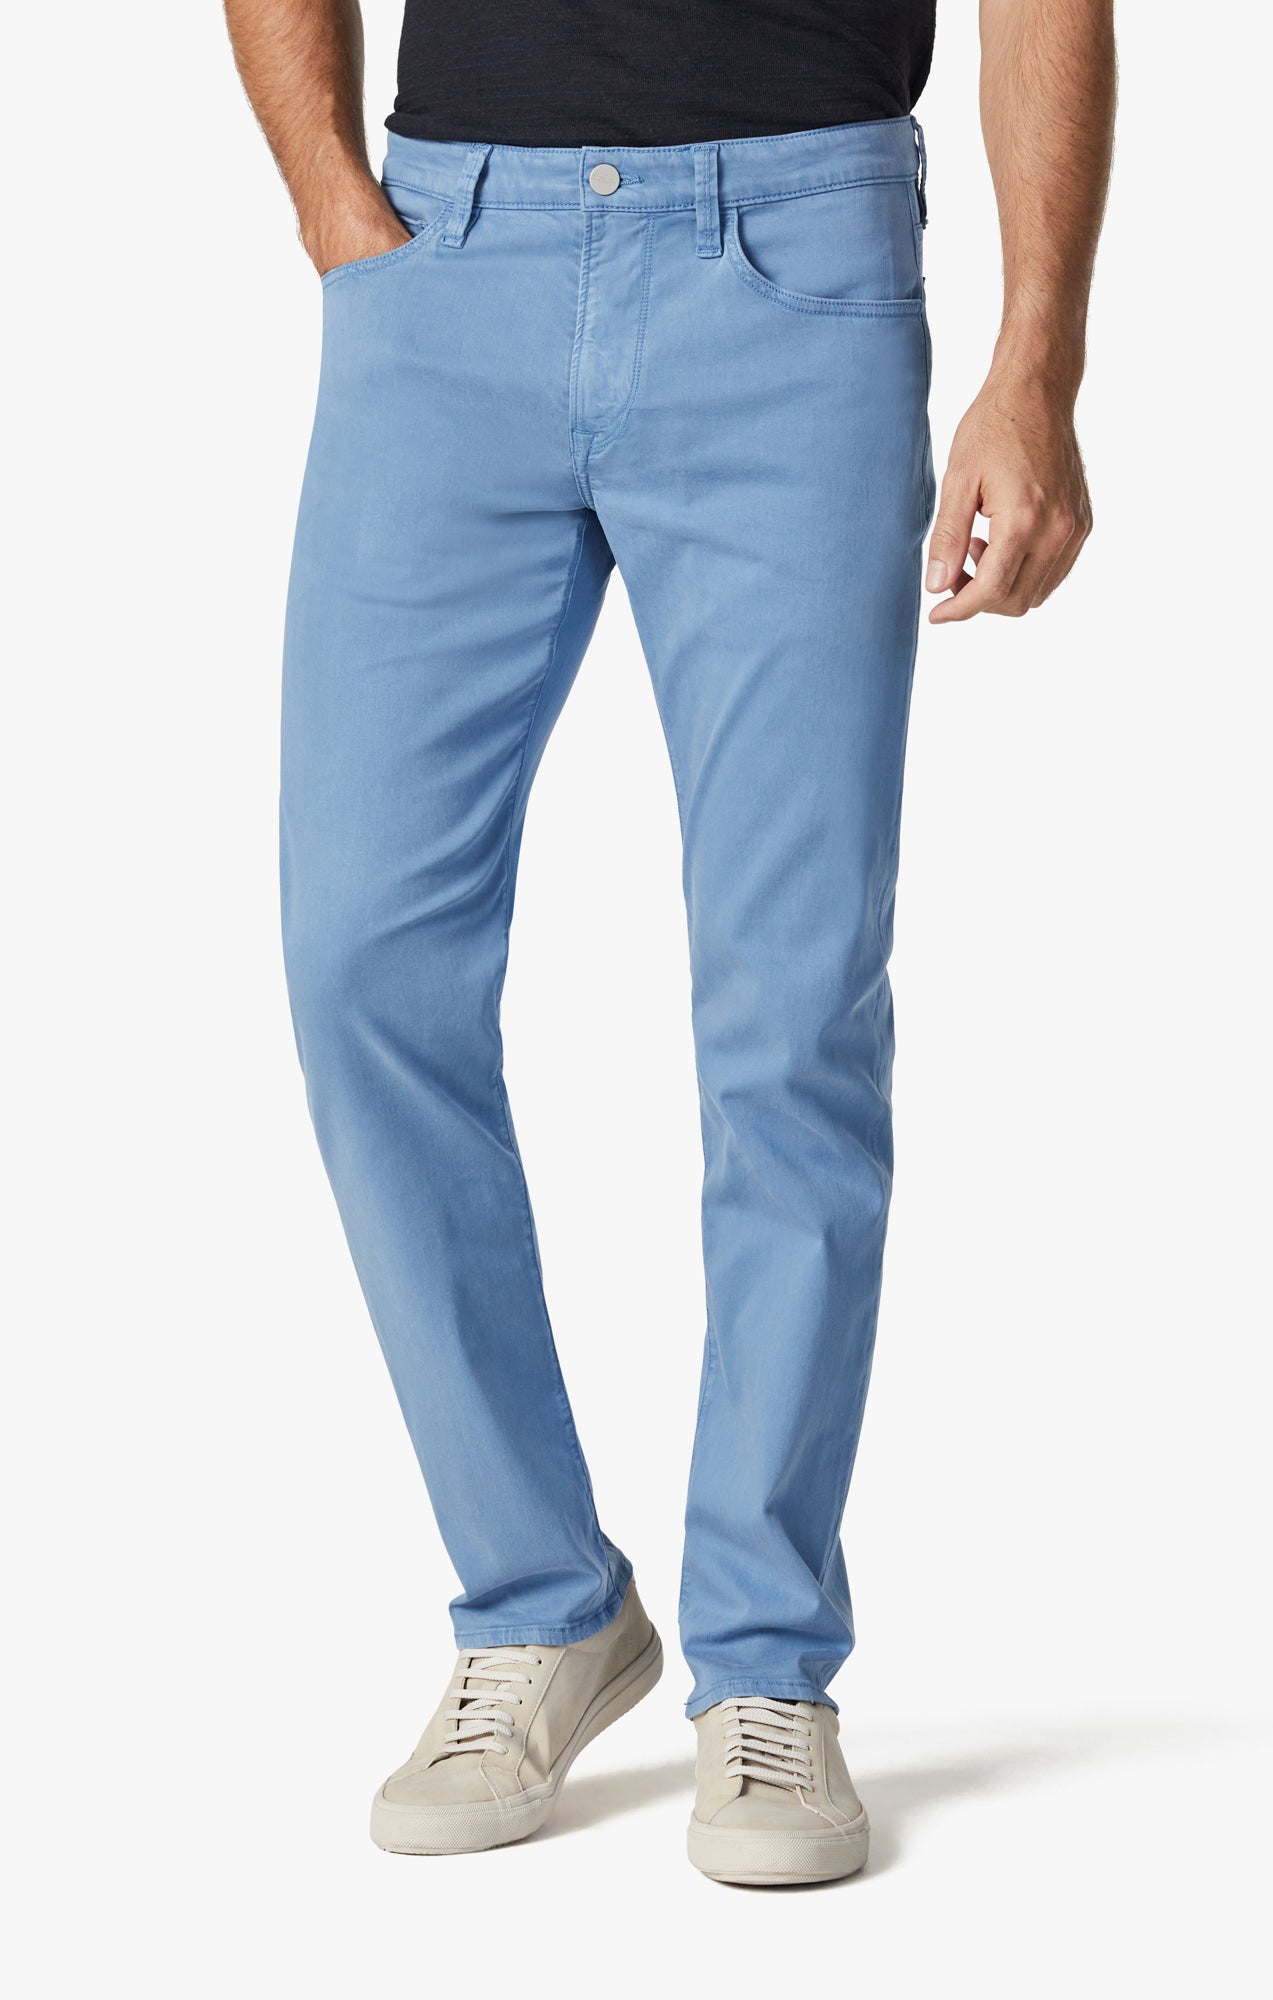 Charisma Relaxed Straight Leg Pants In Quiet Harbor Twill Image 2